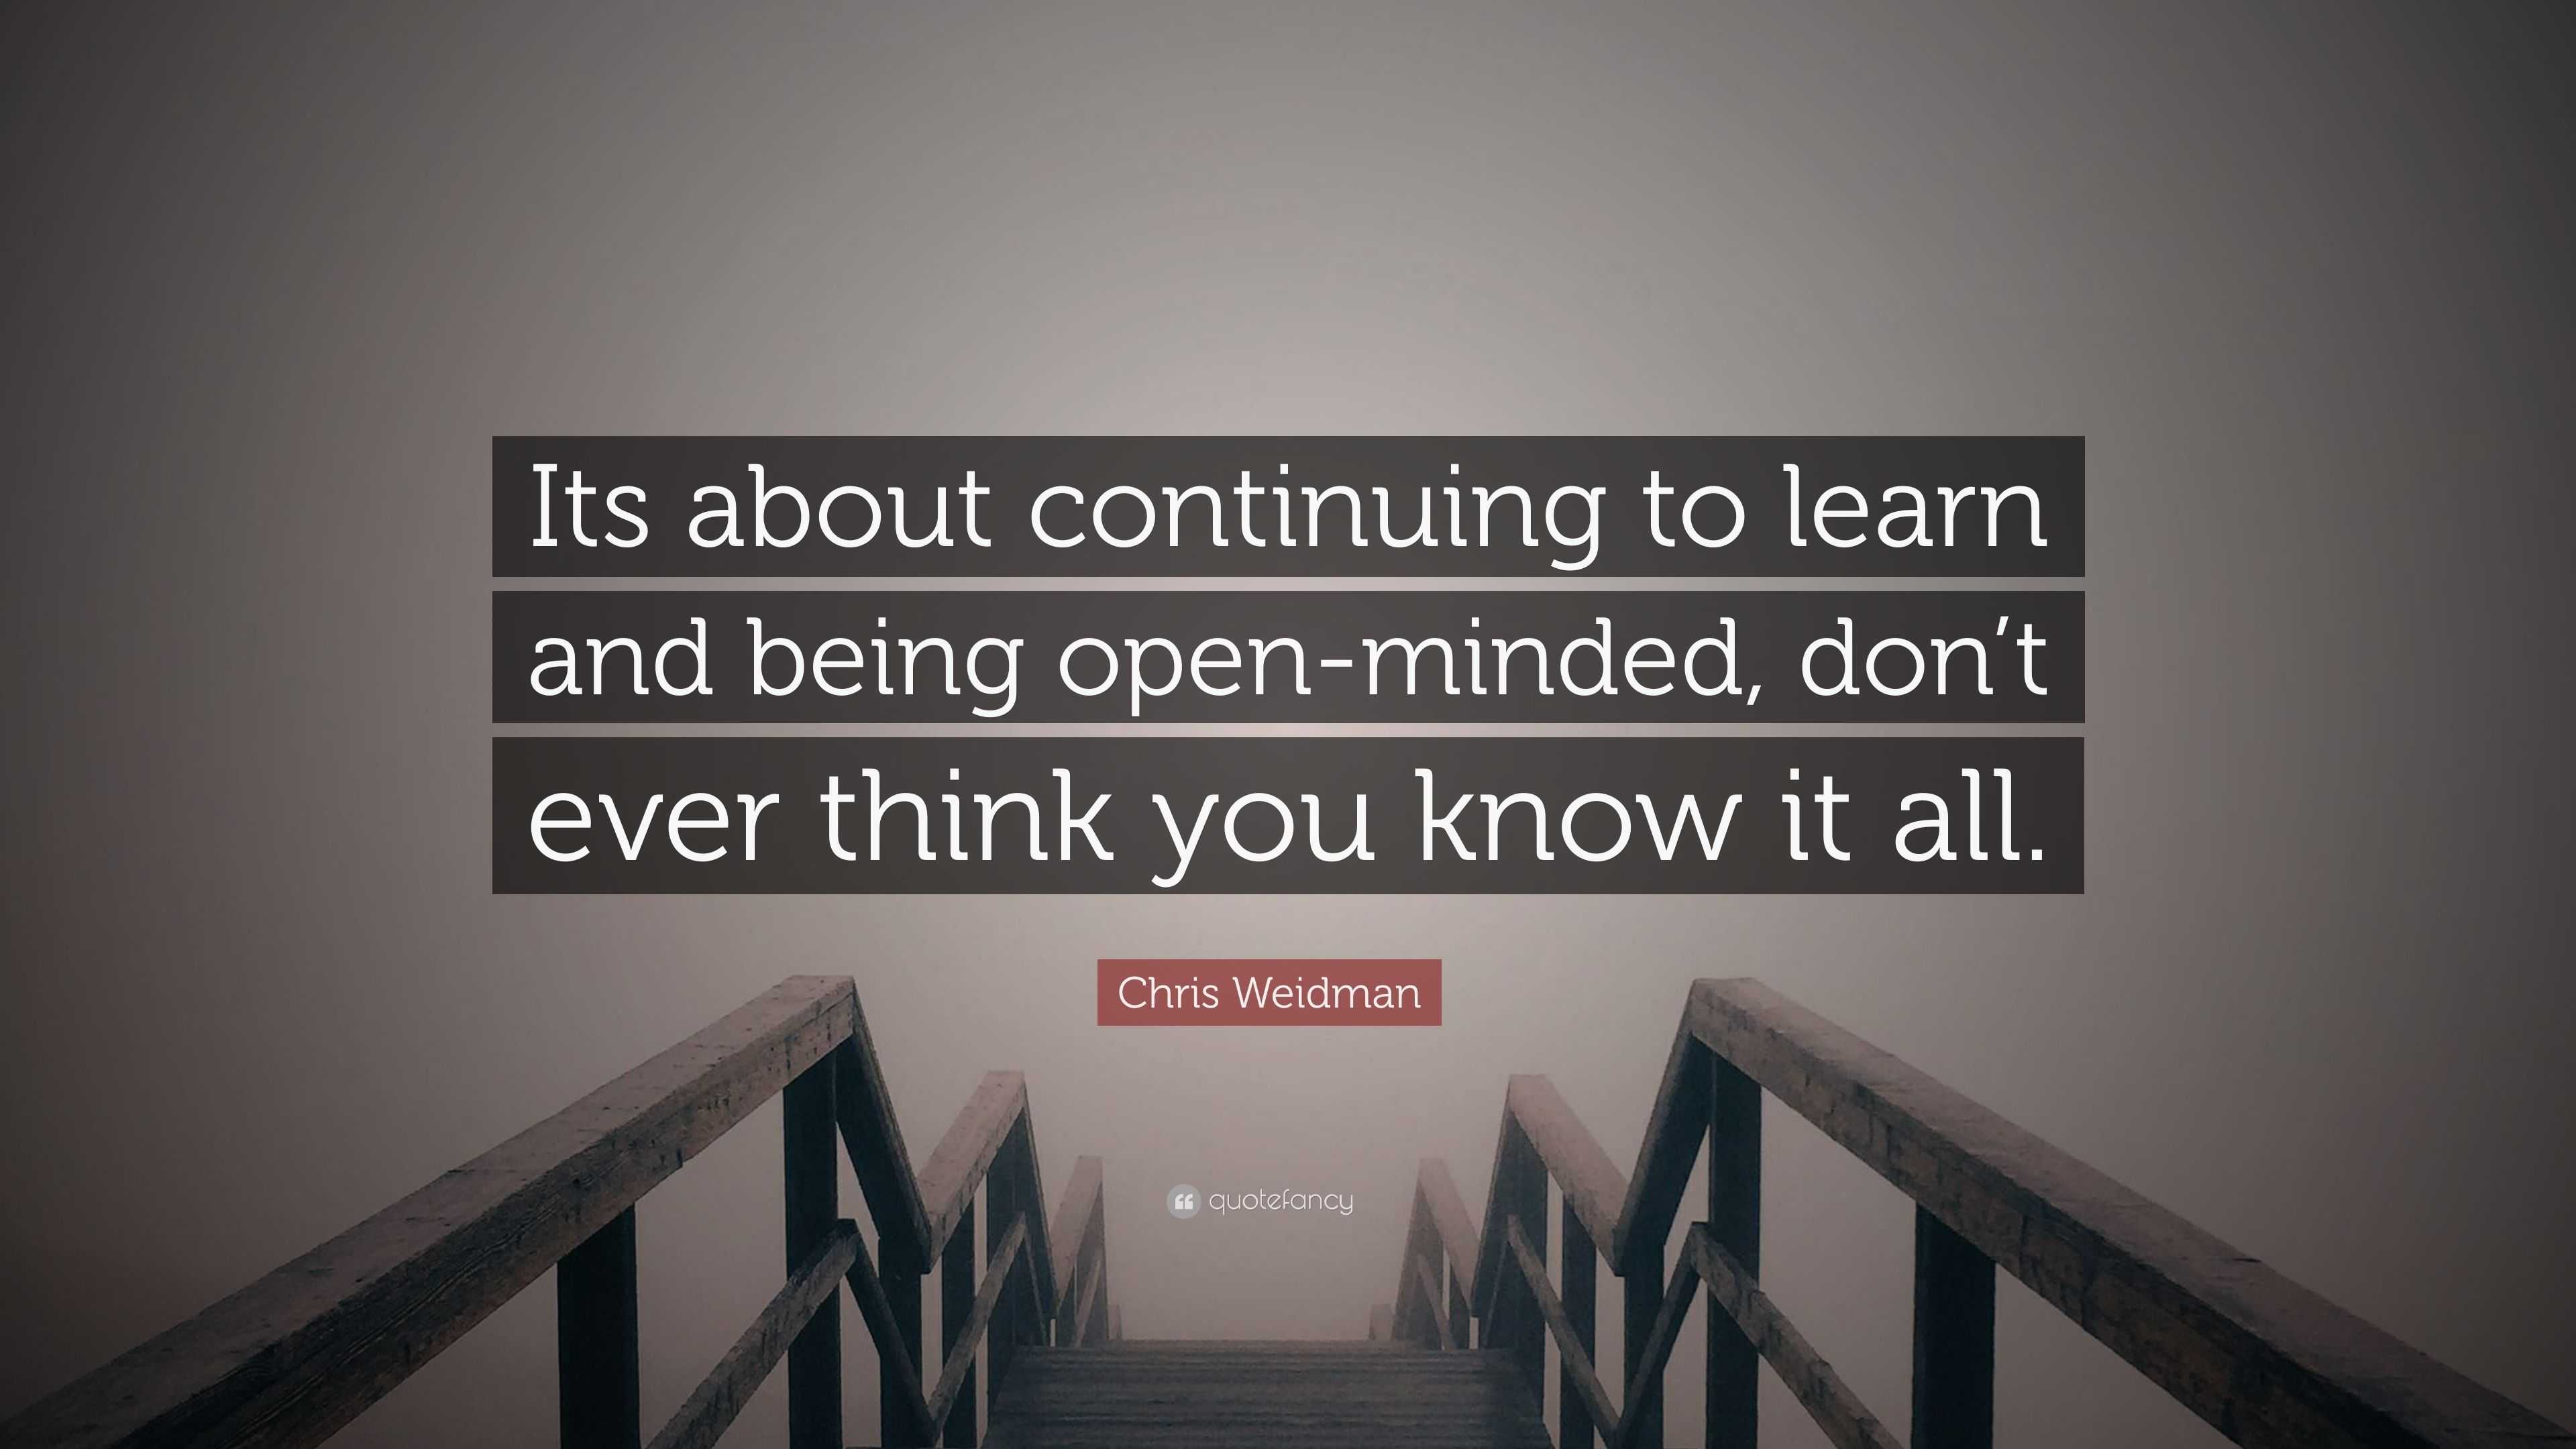 Being open to learn lessons. Some people think they know it all